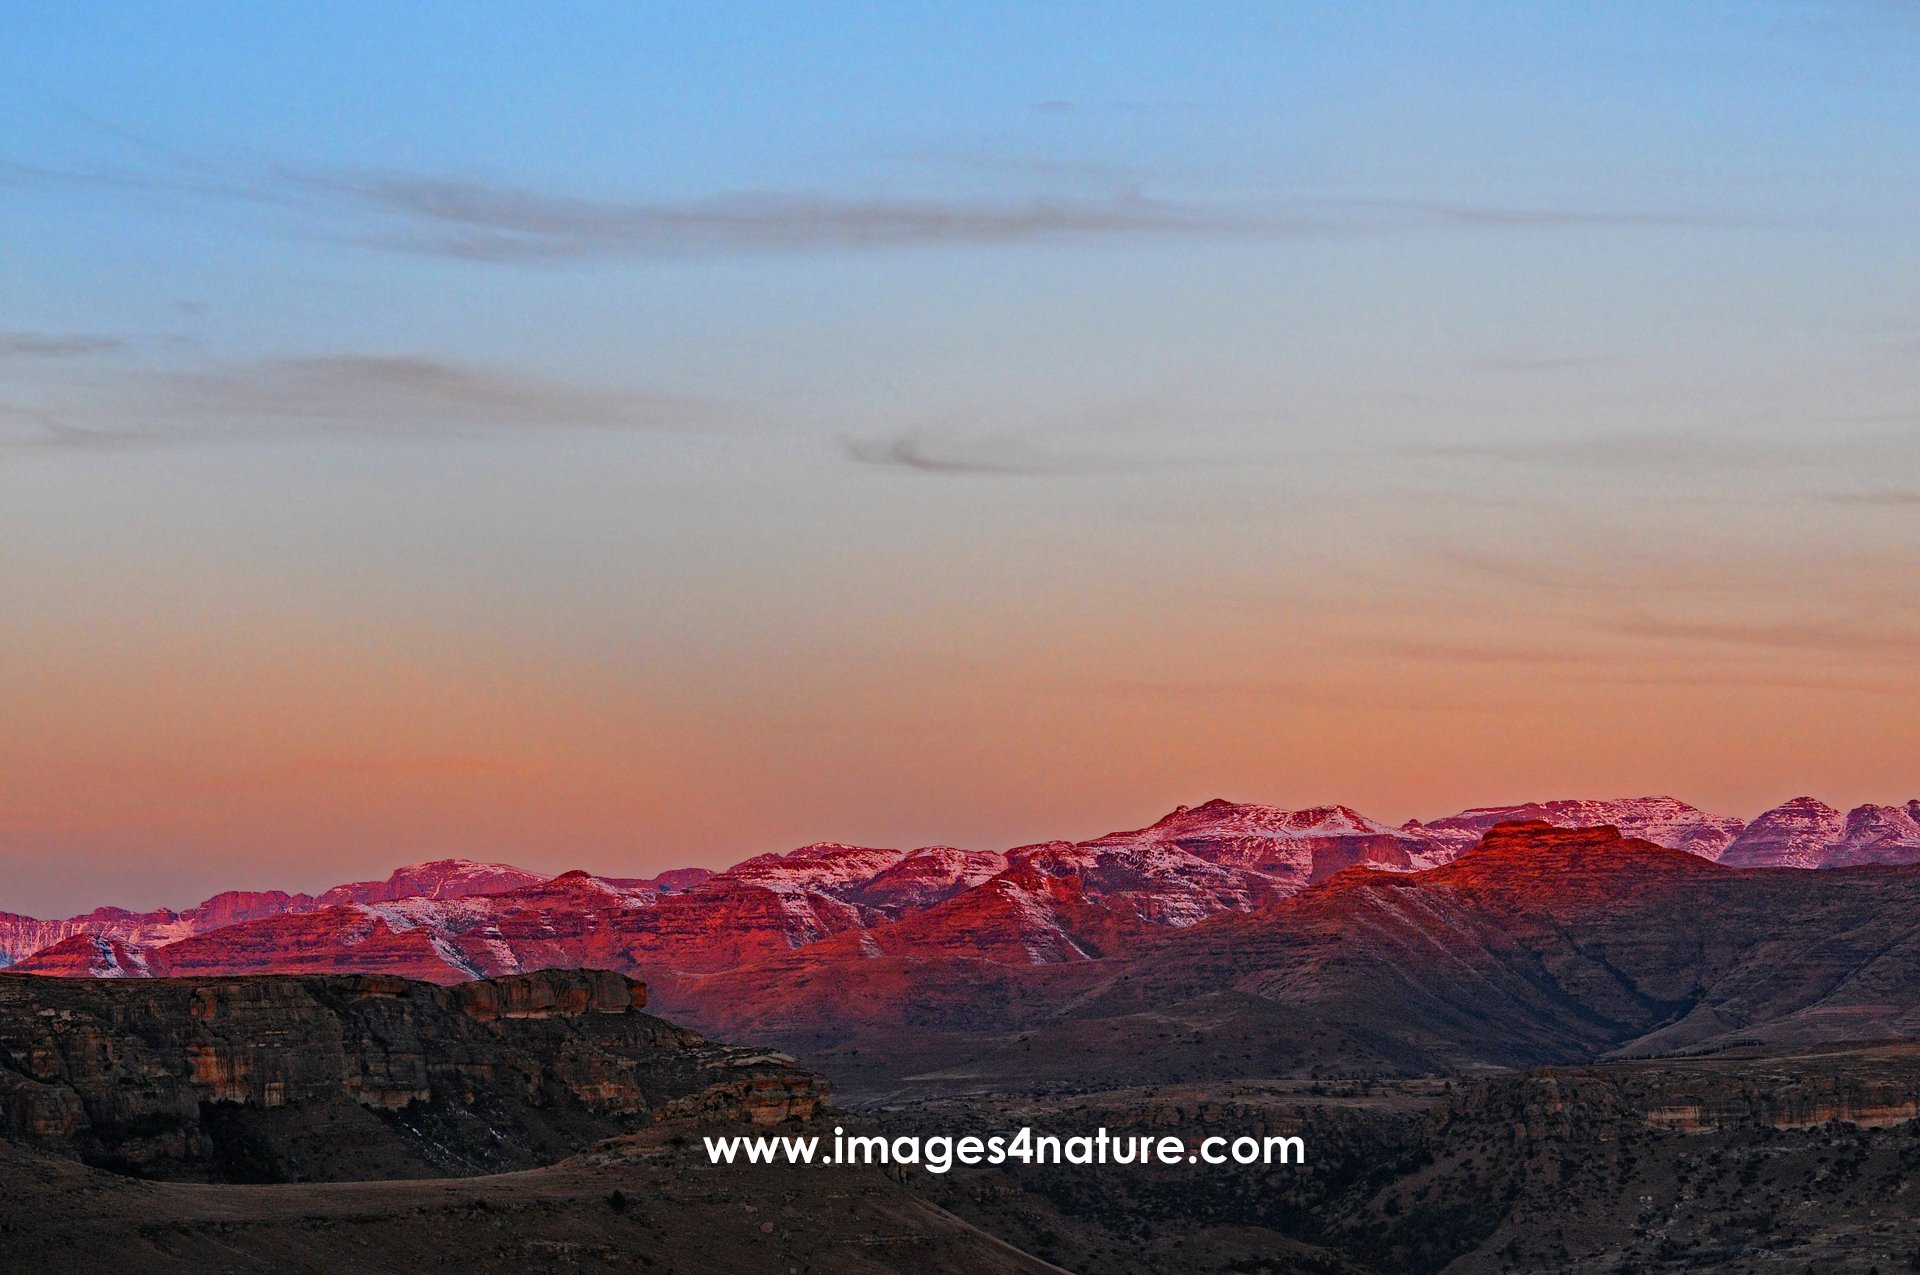 Mountain range of Golden Gate highlands glowing red at sunset